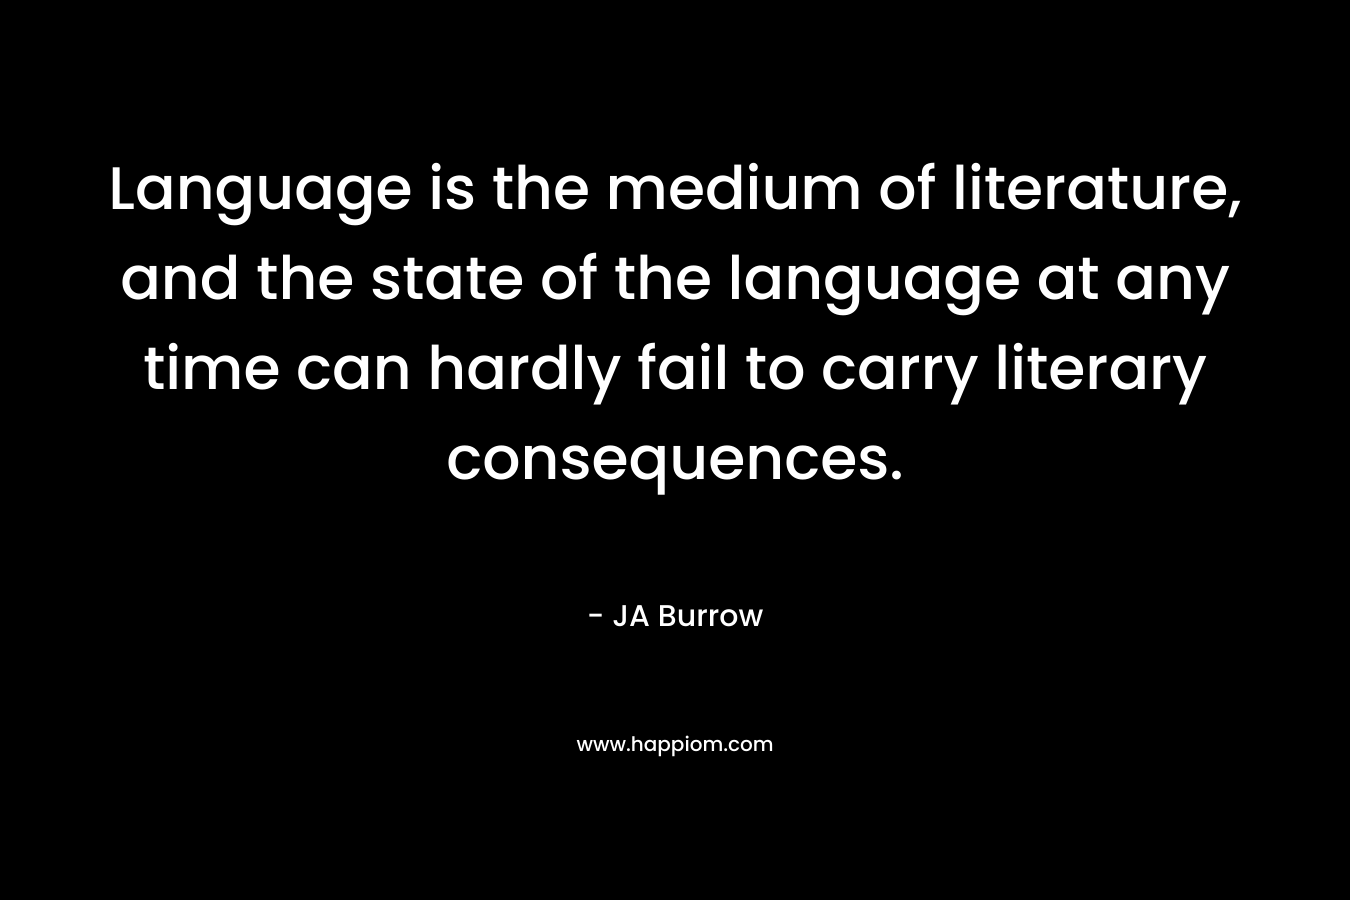 Language is the medium of literature, and the state of the language at any time can hardly fail to carry literary consequences.